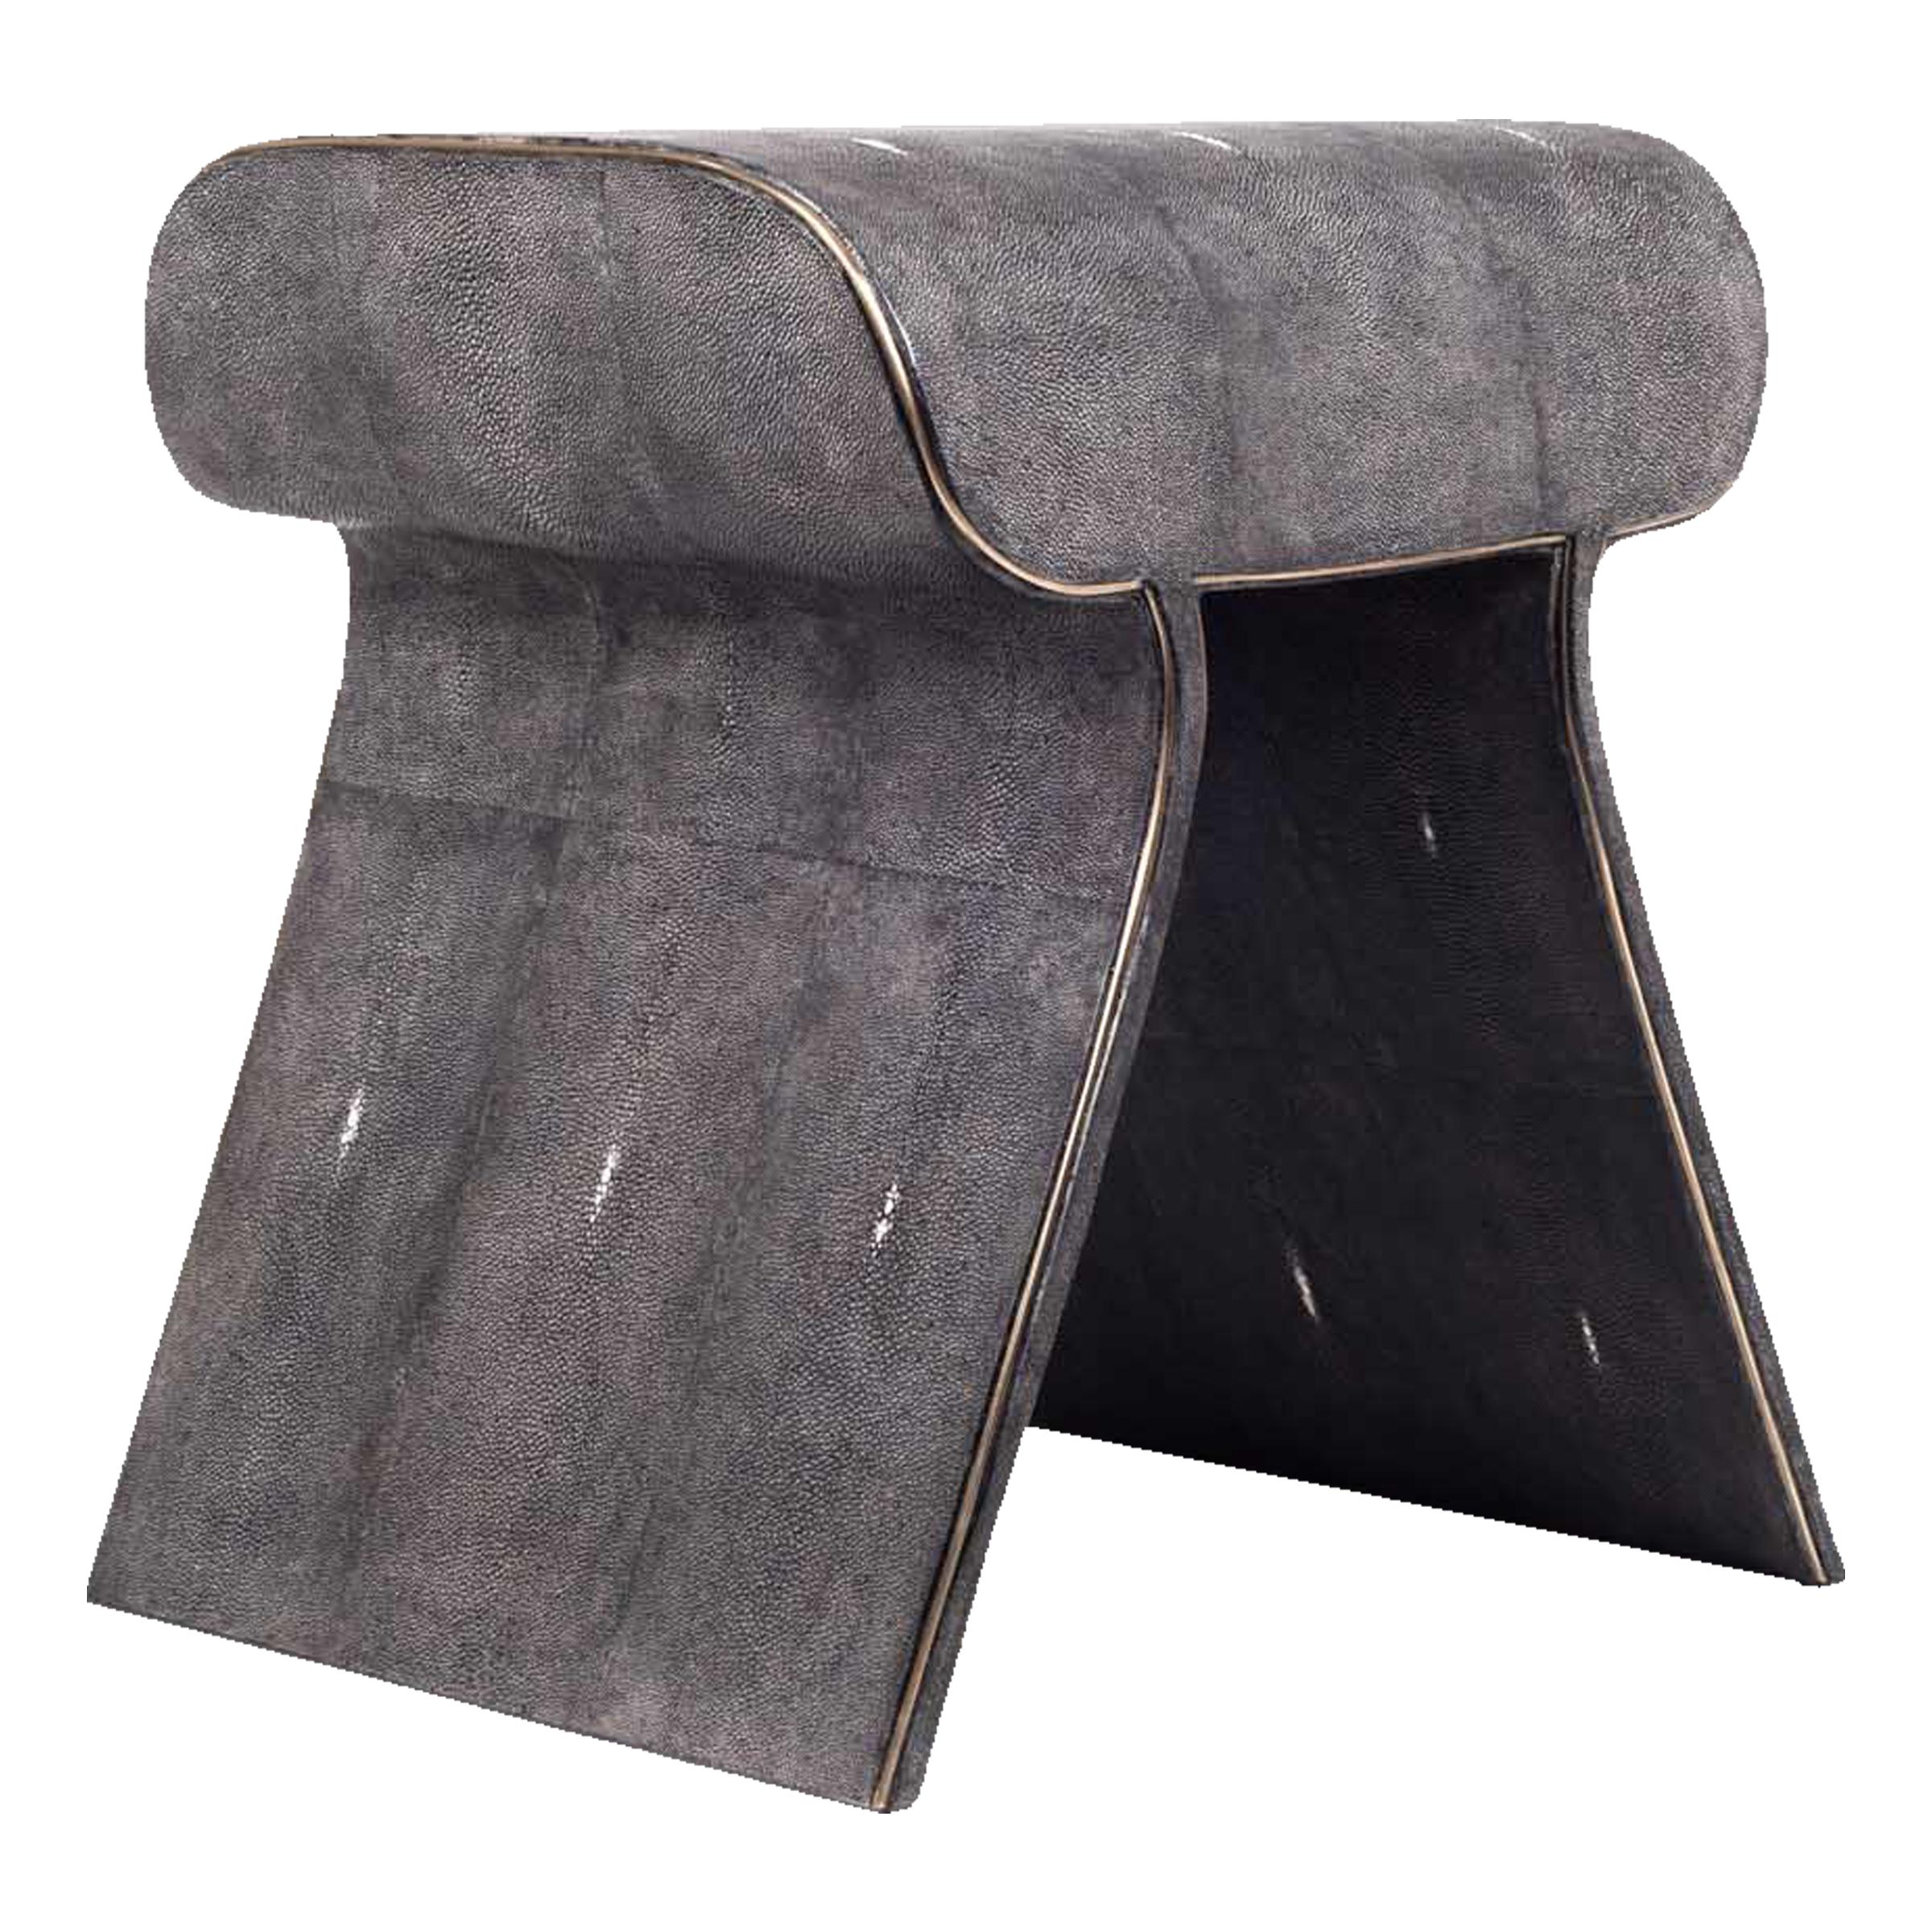 Dandy Stool in Mink Shagreen and Bronze-Patina Brass by Kifu, Paris For Sale 3